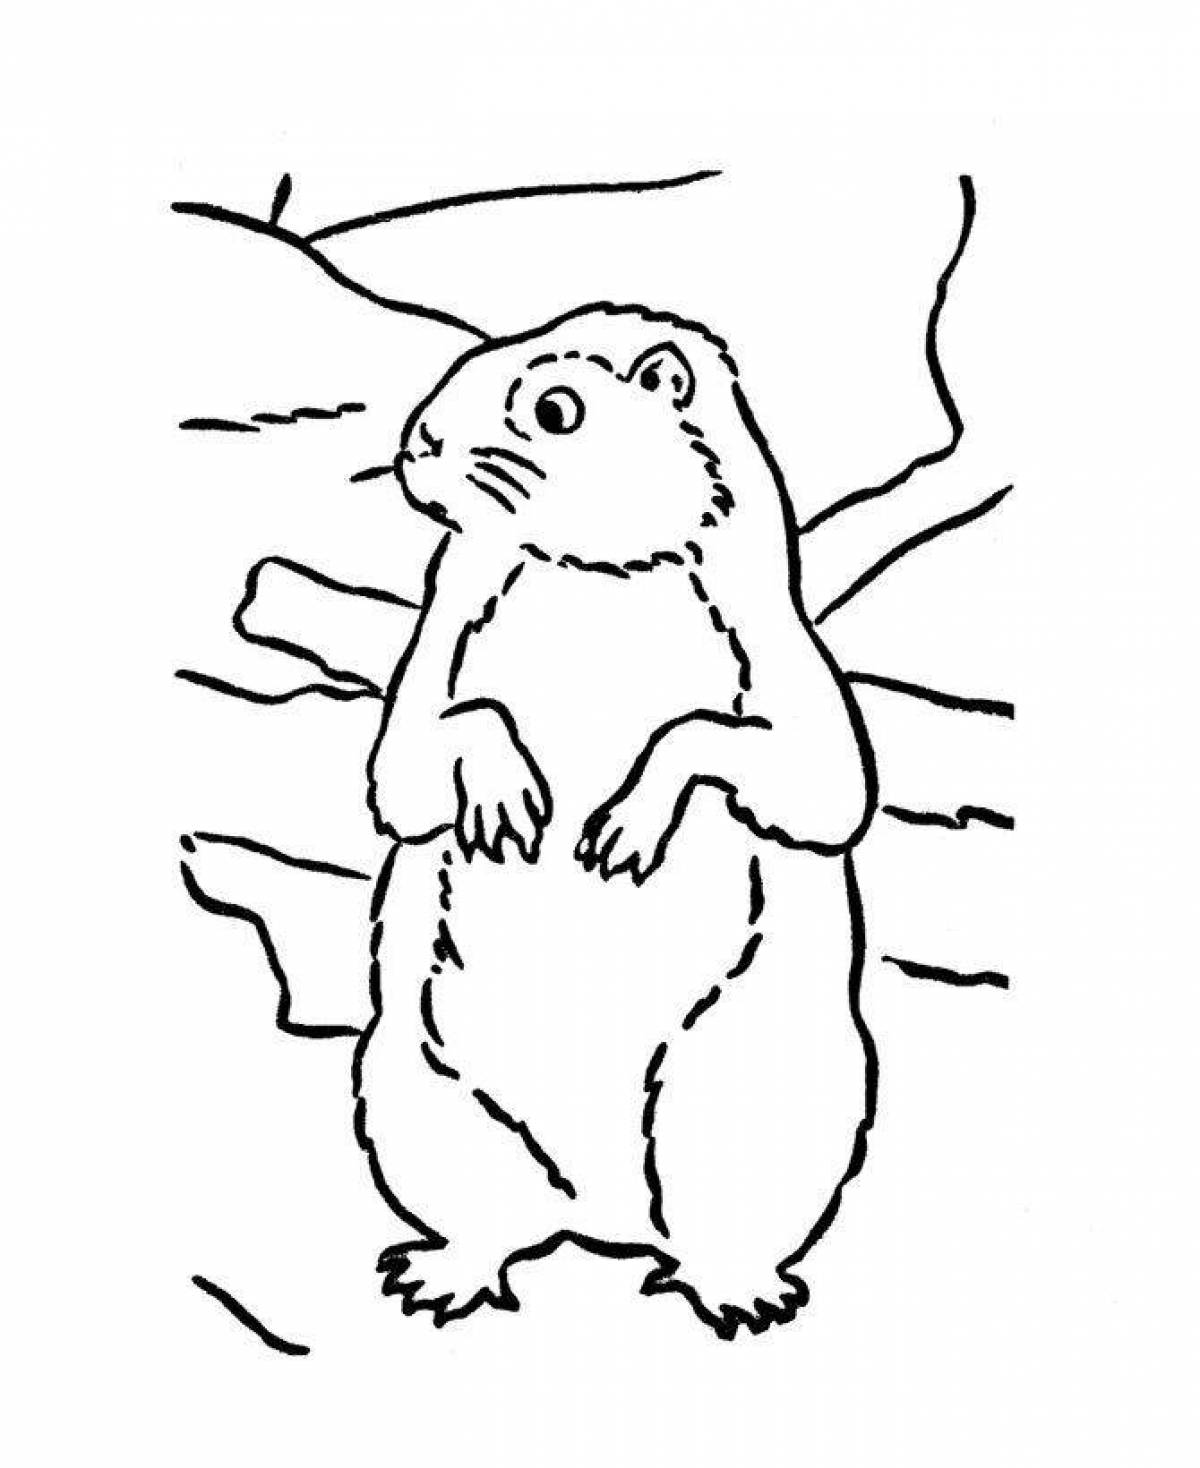 A funny groundhog coloring book